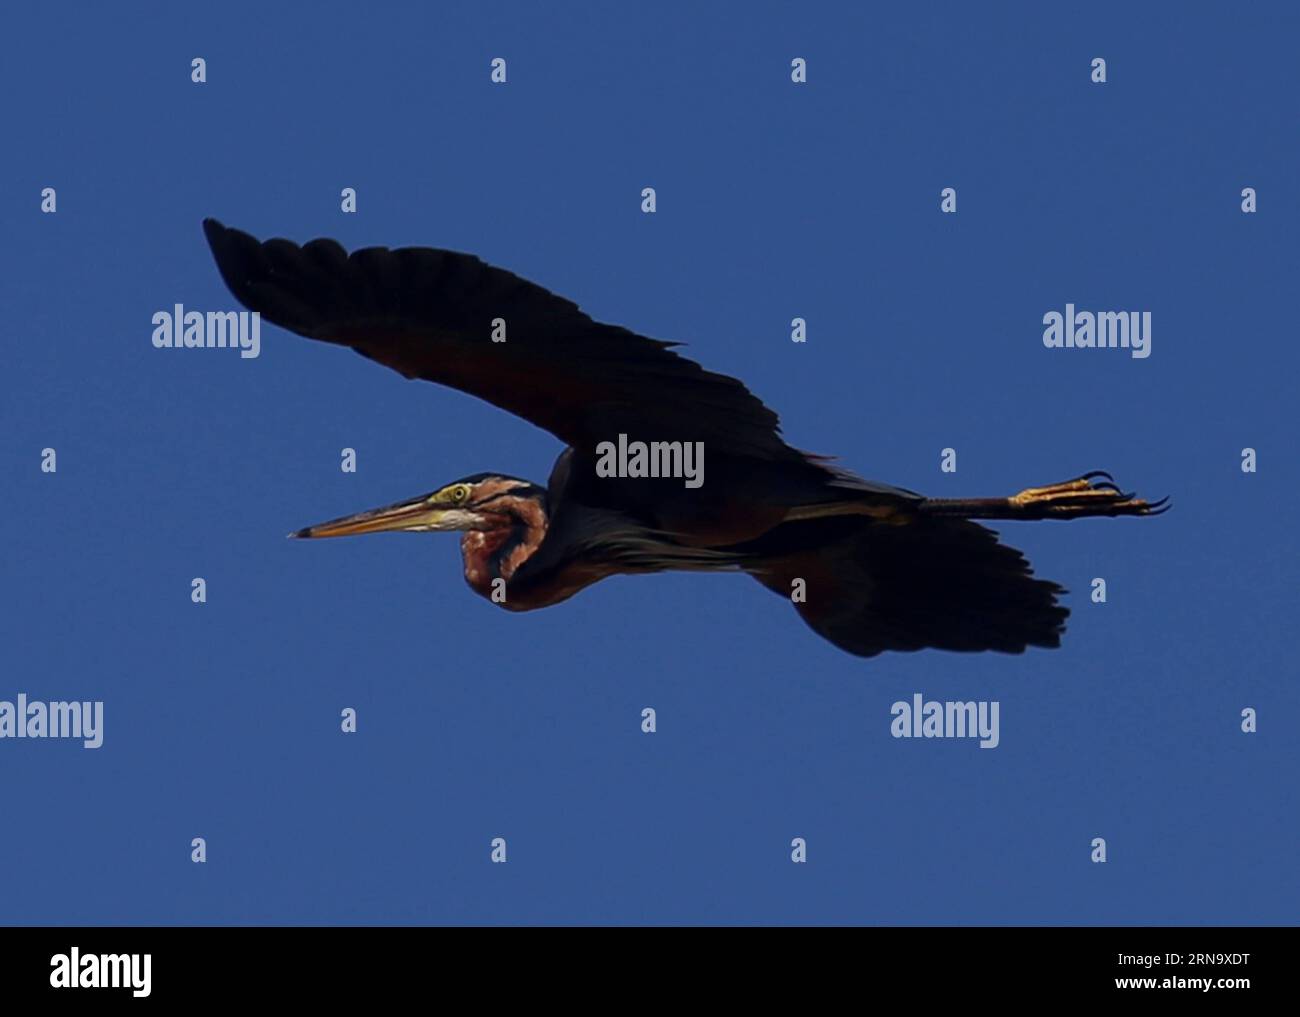 (151223) -- BAGO, Dec. 23, 2015 -- Photo taken on Dec. 23, 2015 shows a purple heron flying over Moeyungyi Wetland Wildlife Sanctuary in Bago region, Myanmar. Moeyungyi Wetlands is situated in Bago Division. Every year, millions of birds usually fly from the northern hemisphere to the south along the East-Asian Australian Flyway to escape from winter. They stop to rest and feed in Asia. So the flyway contains a network of wetlands and Moeyungyi is one of which could cooperate to certain migrated as well as domestic birds. ) MYANMAR-BAGO-WETLAND-WILDLIFE UxAung PUBLICATIONxNOTxINxCHN   151223 B Stock Photo